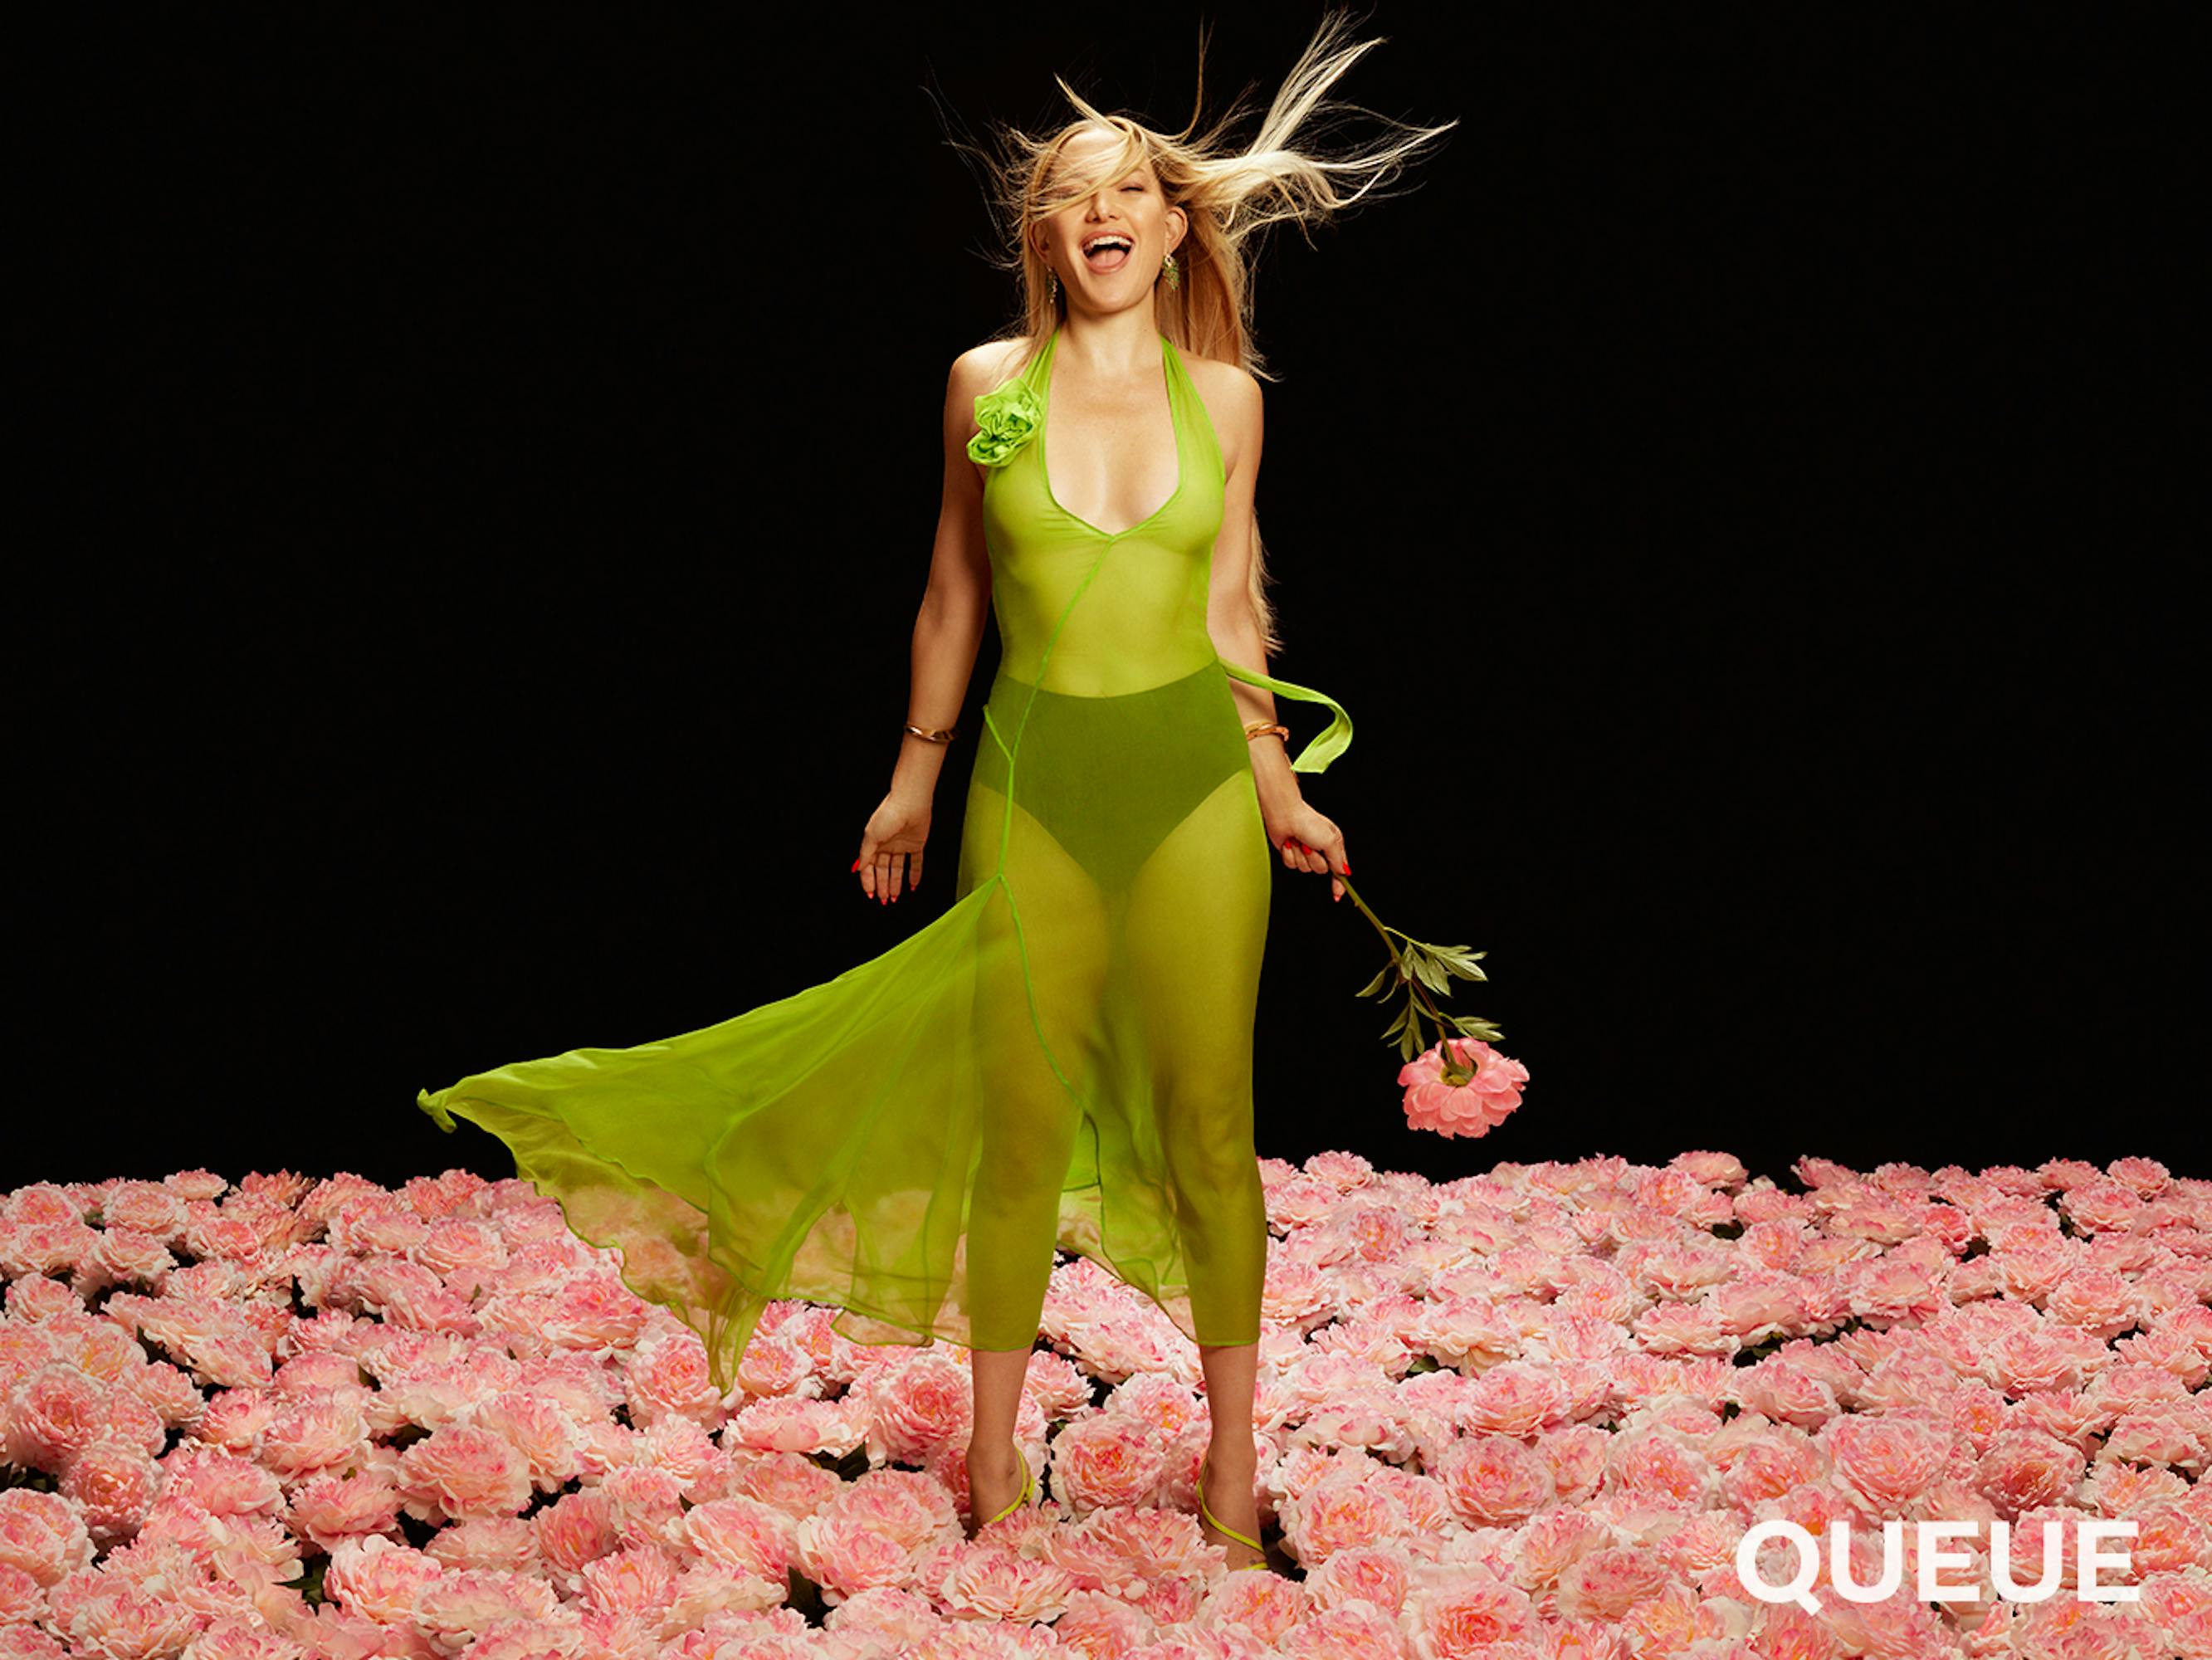 Kate Hudson wears a sheer lime green dress over black underwear and stands in a field of roses on this digital cover.